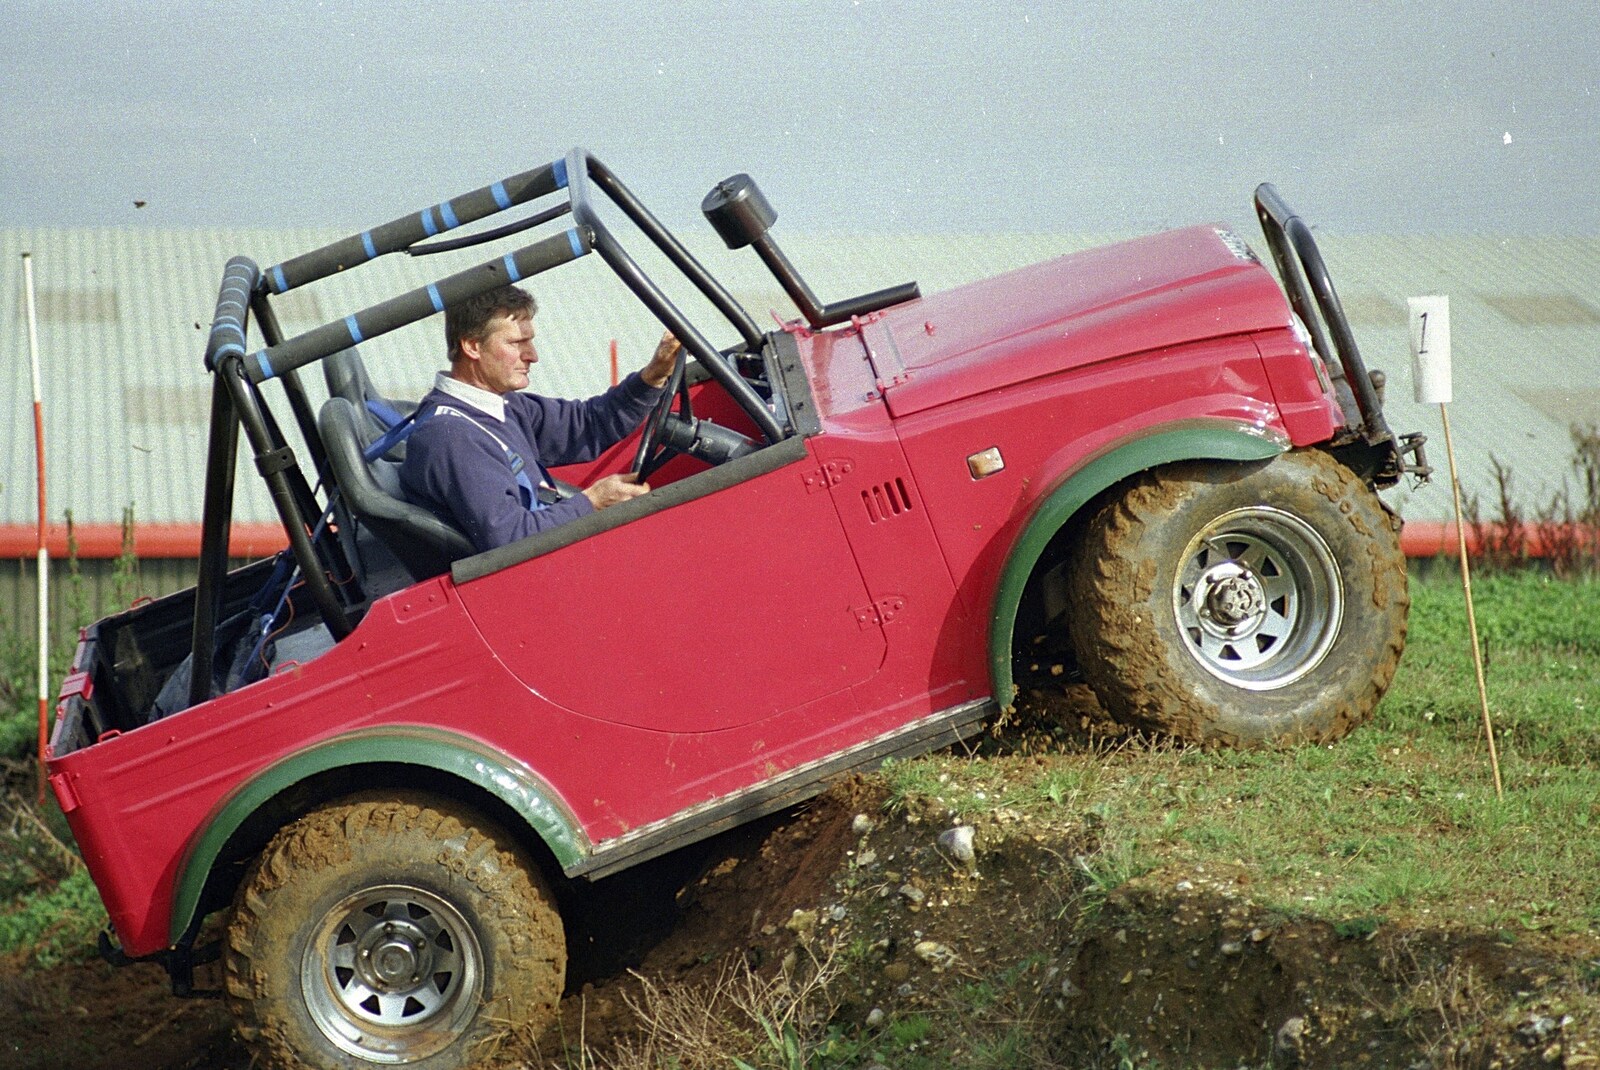 The Daihatsu is stuck on a ridge from Off-roading with Geoff and Brenda, Stuston and Elsewhere, Suffolk - 15th September 1995